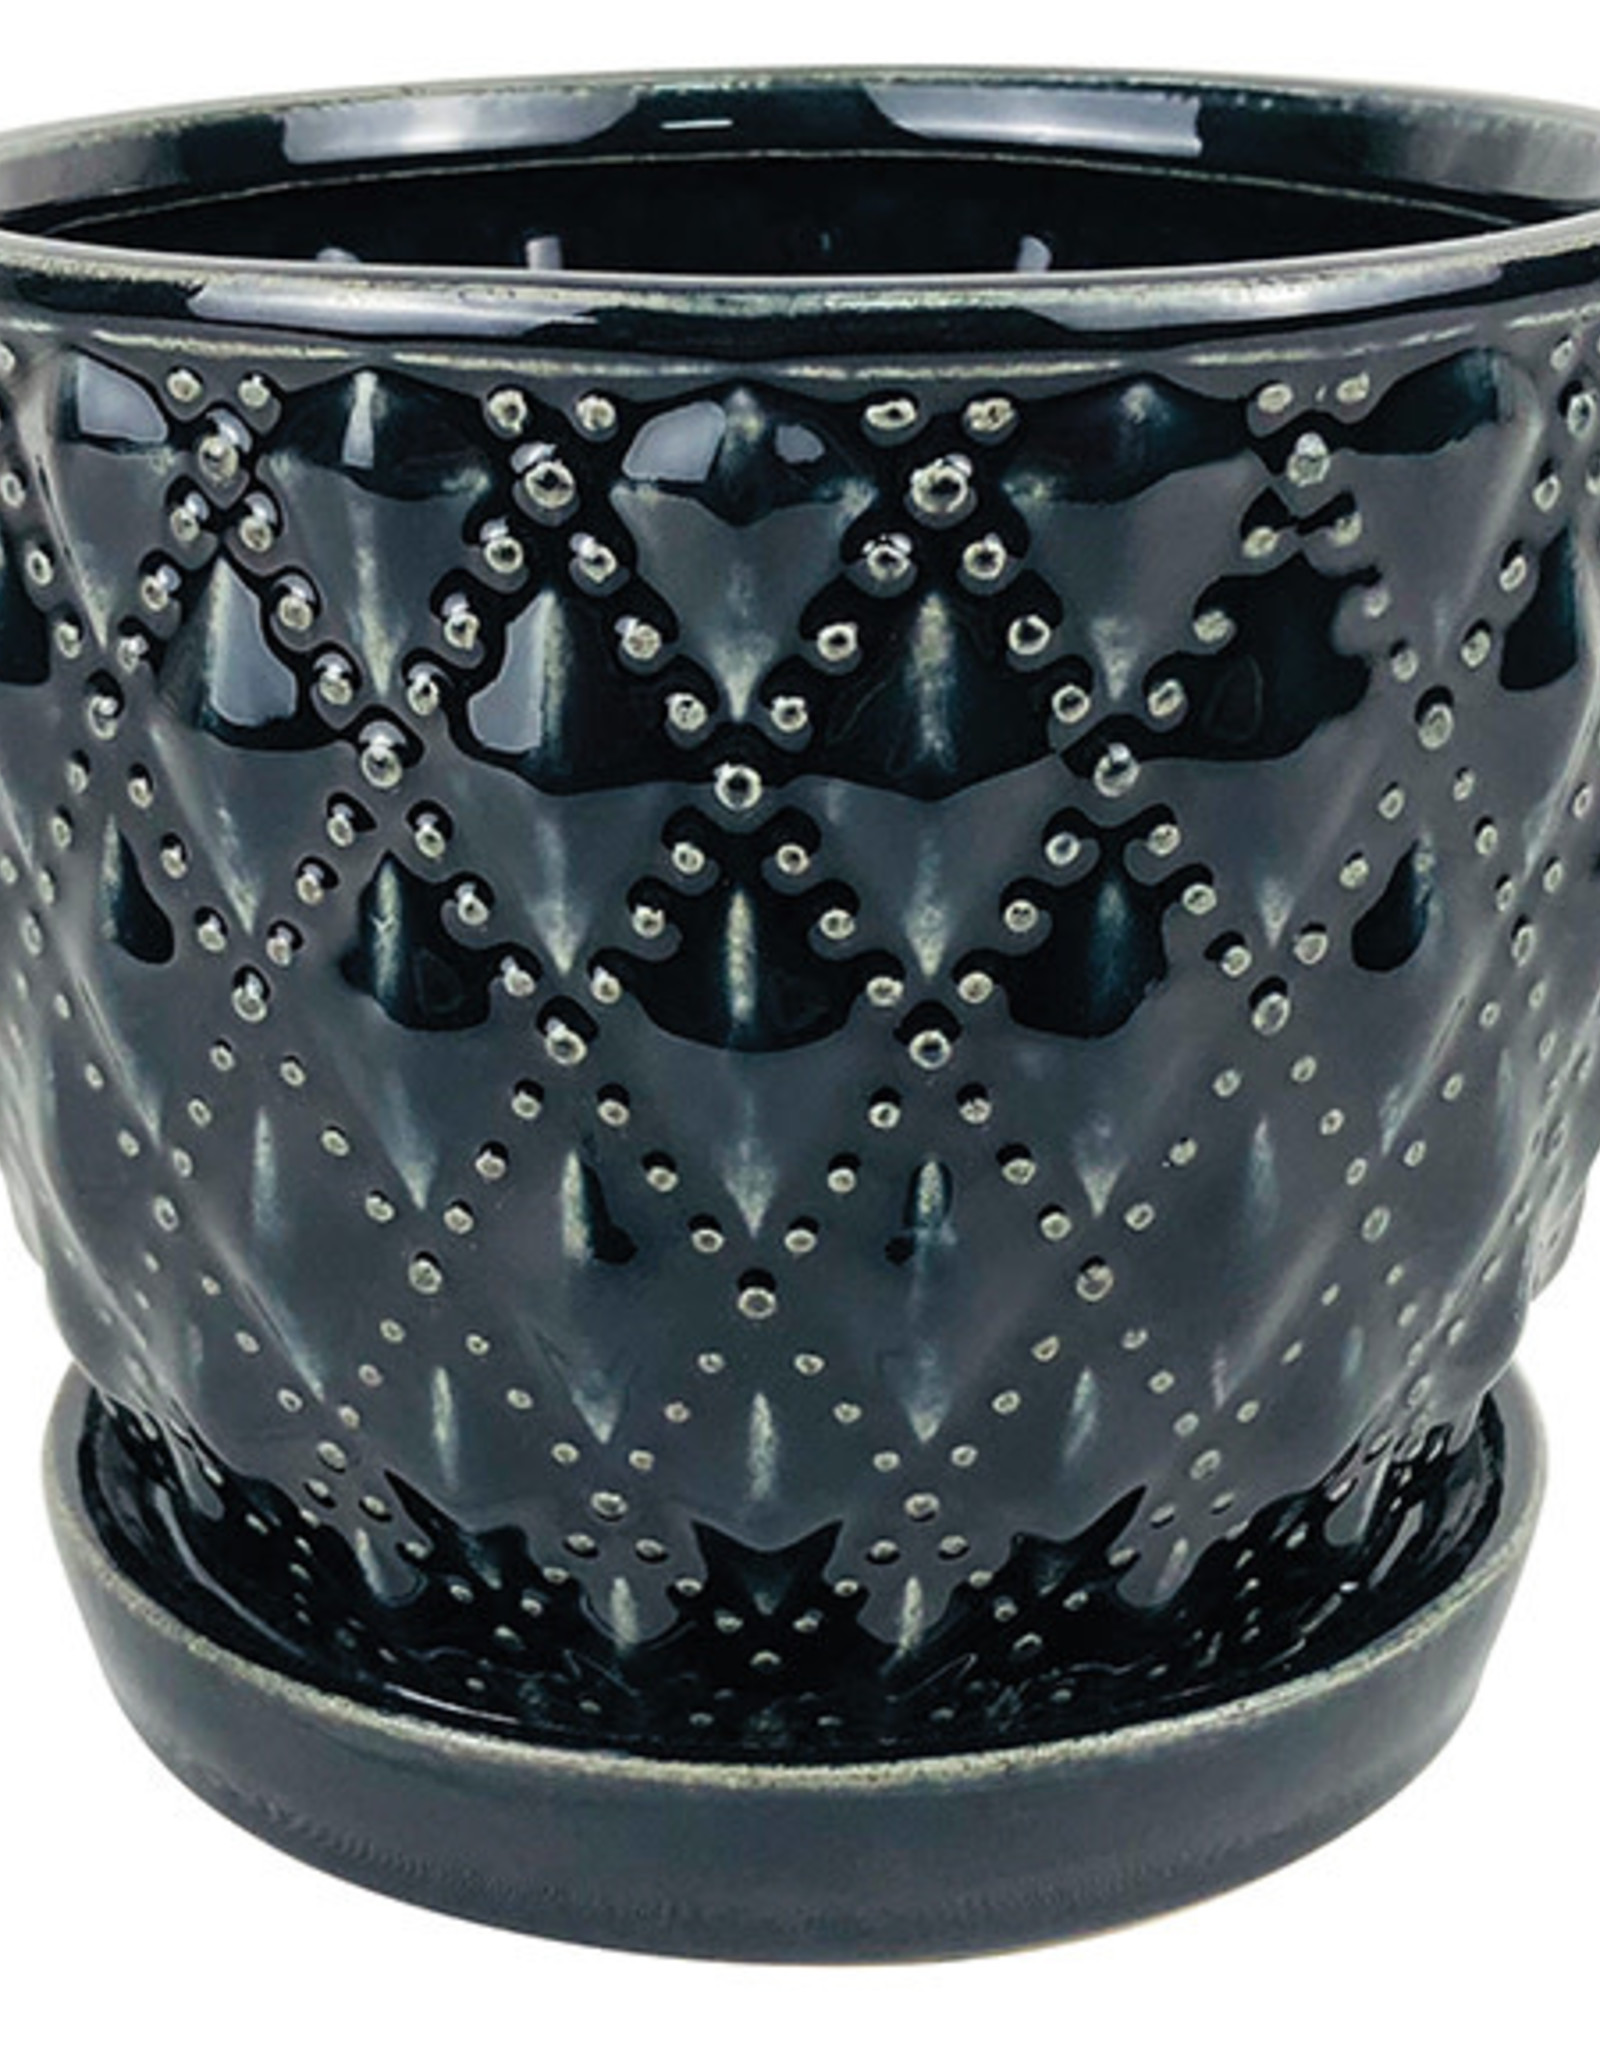 Beaded Diagonal Planter with Attached Saucer Black 5.5"